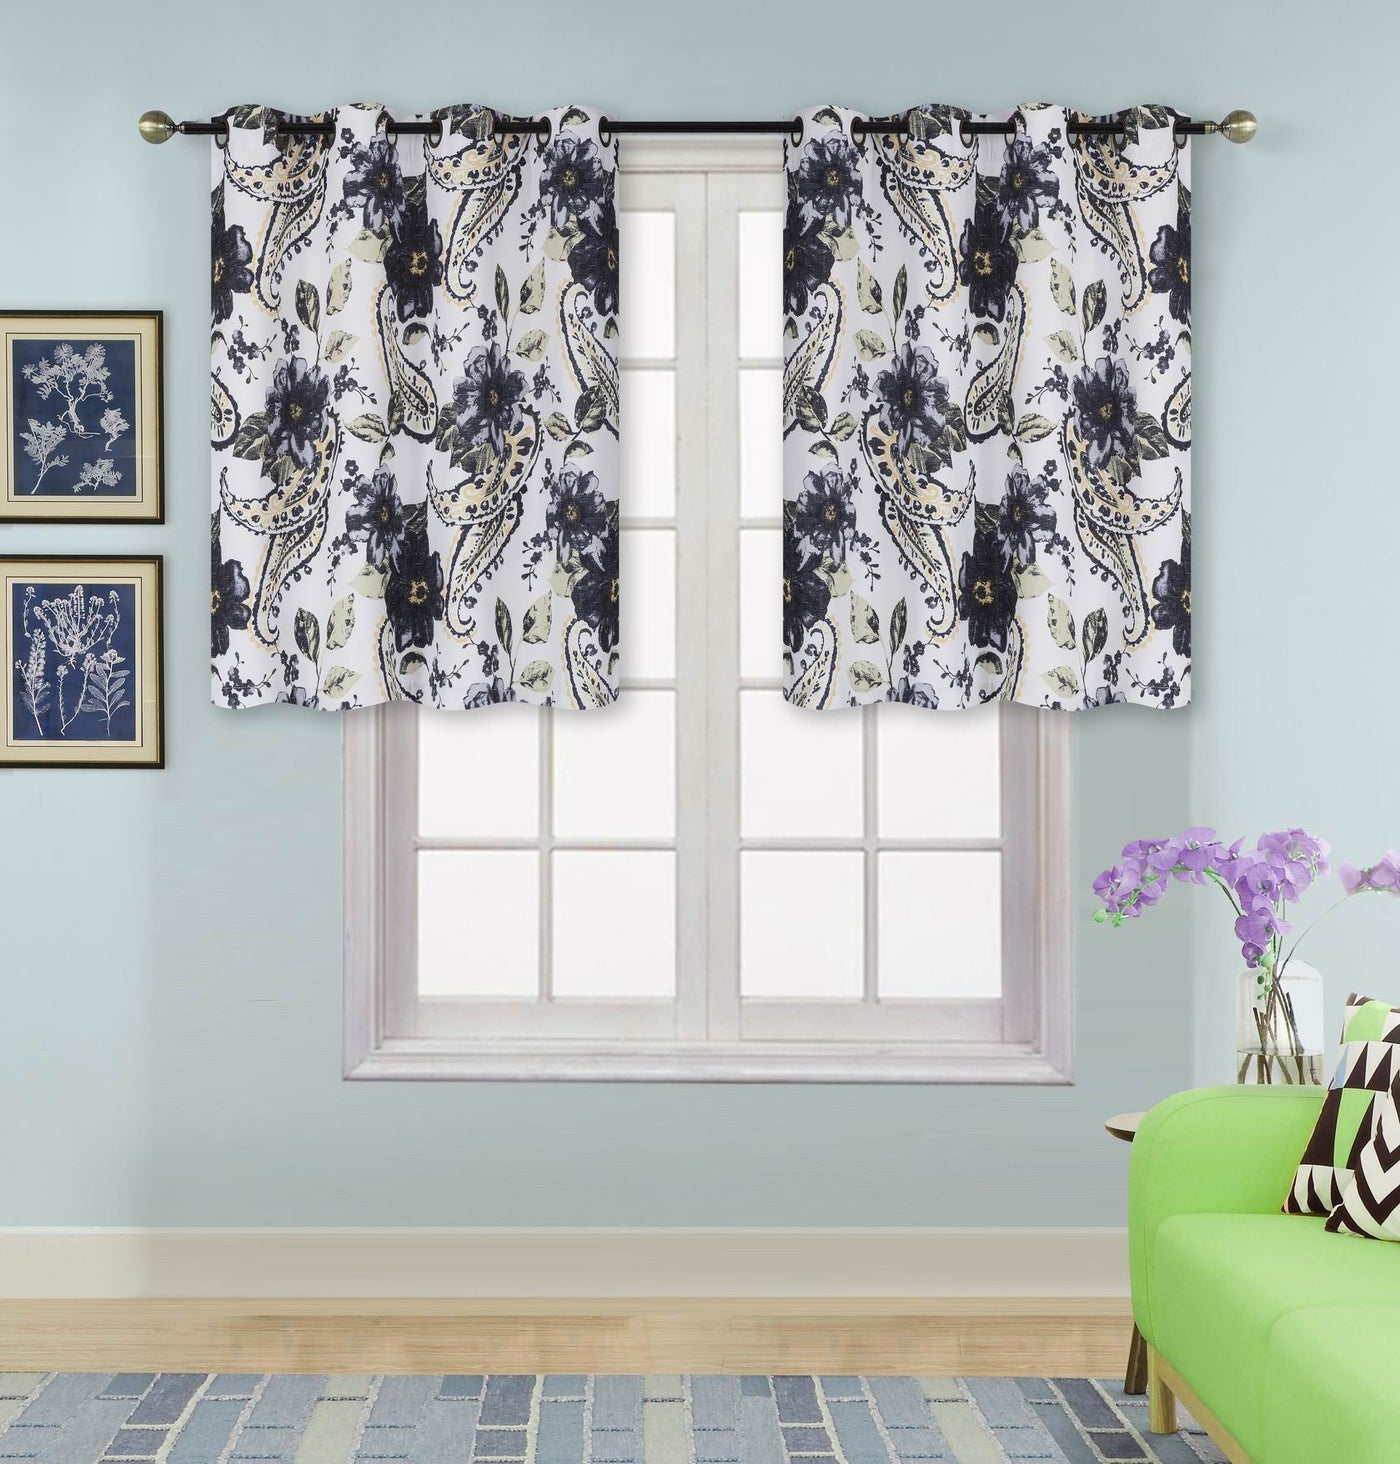 2pc Room Darkening Paisley Window Curtains Floral Curtains Blackout Window Treatment Panels - Jenin-Home-Furnishing.CURTAINS